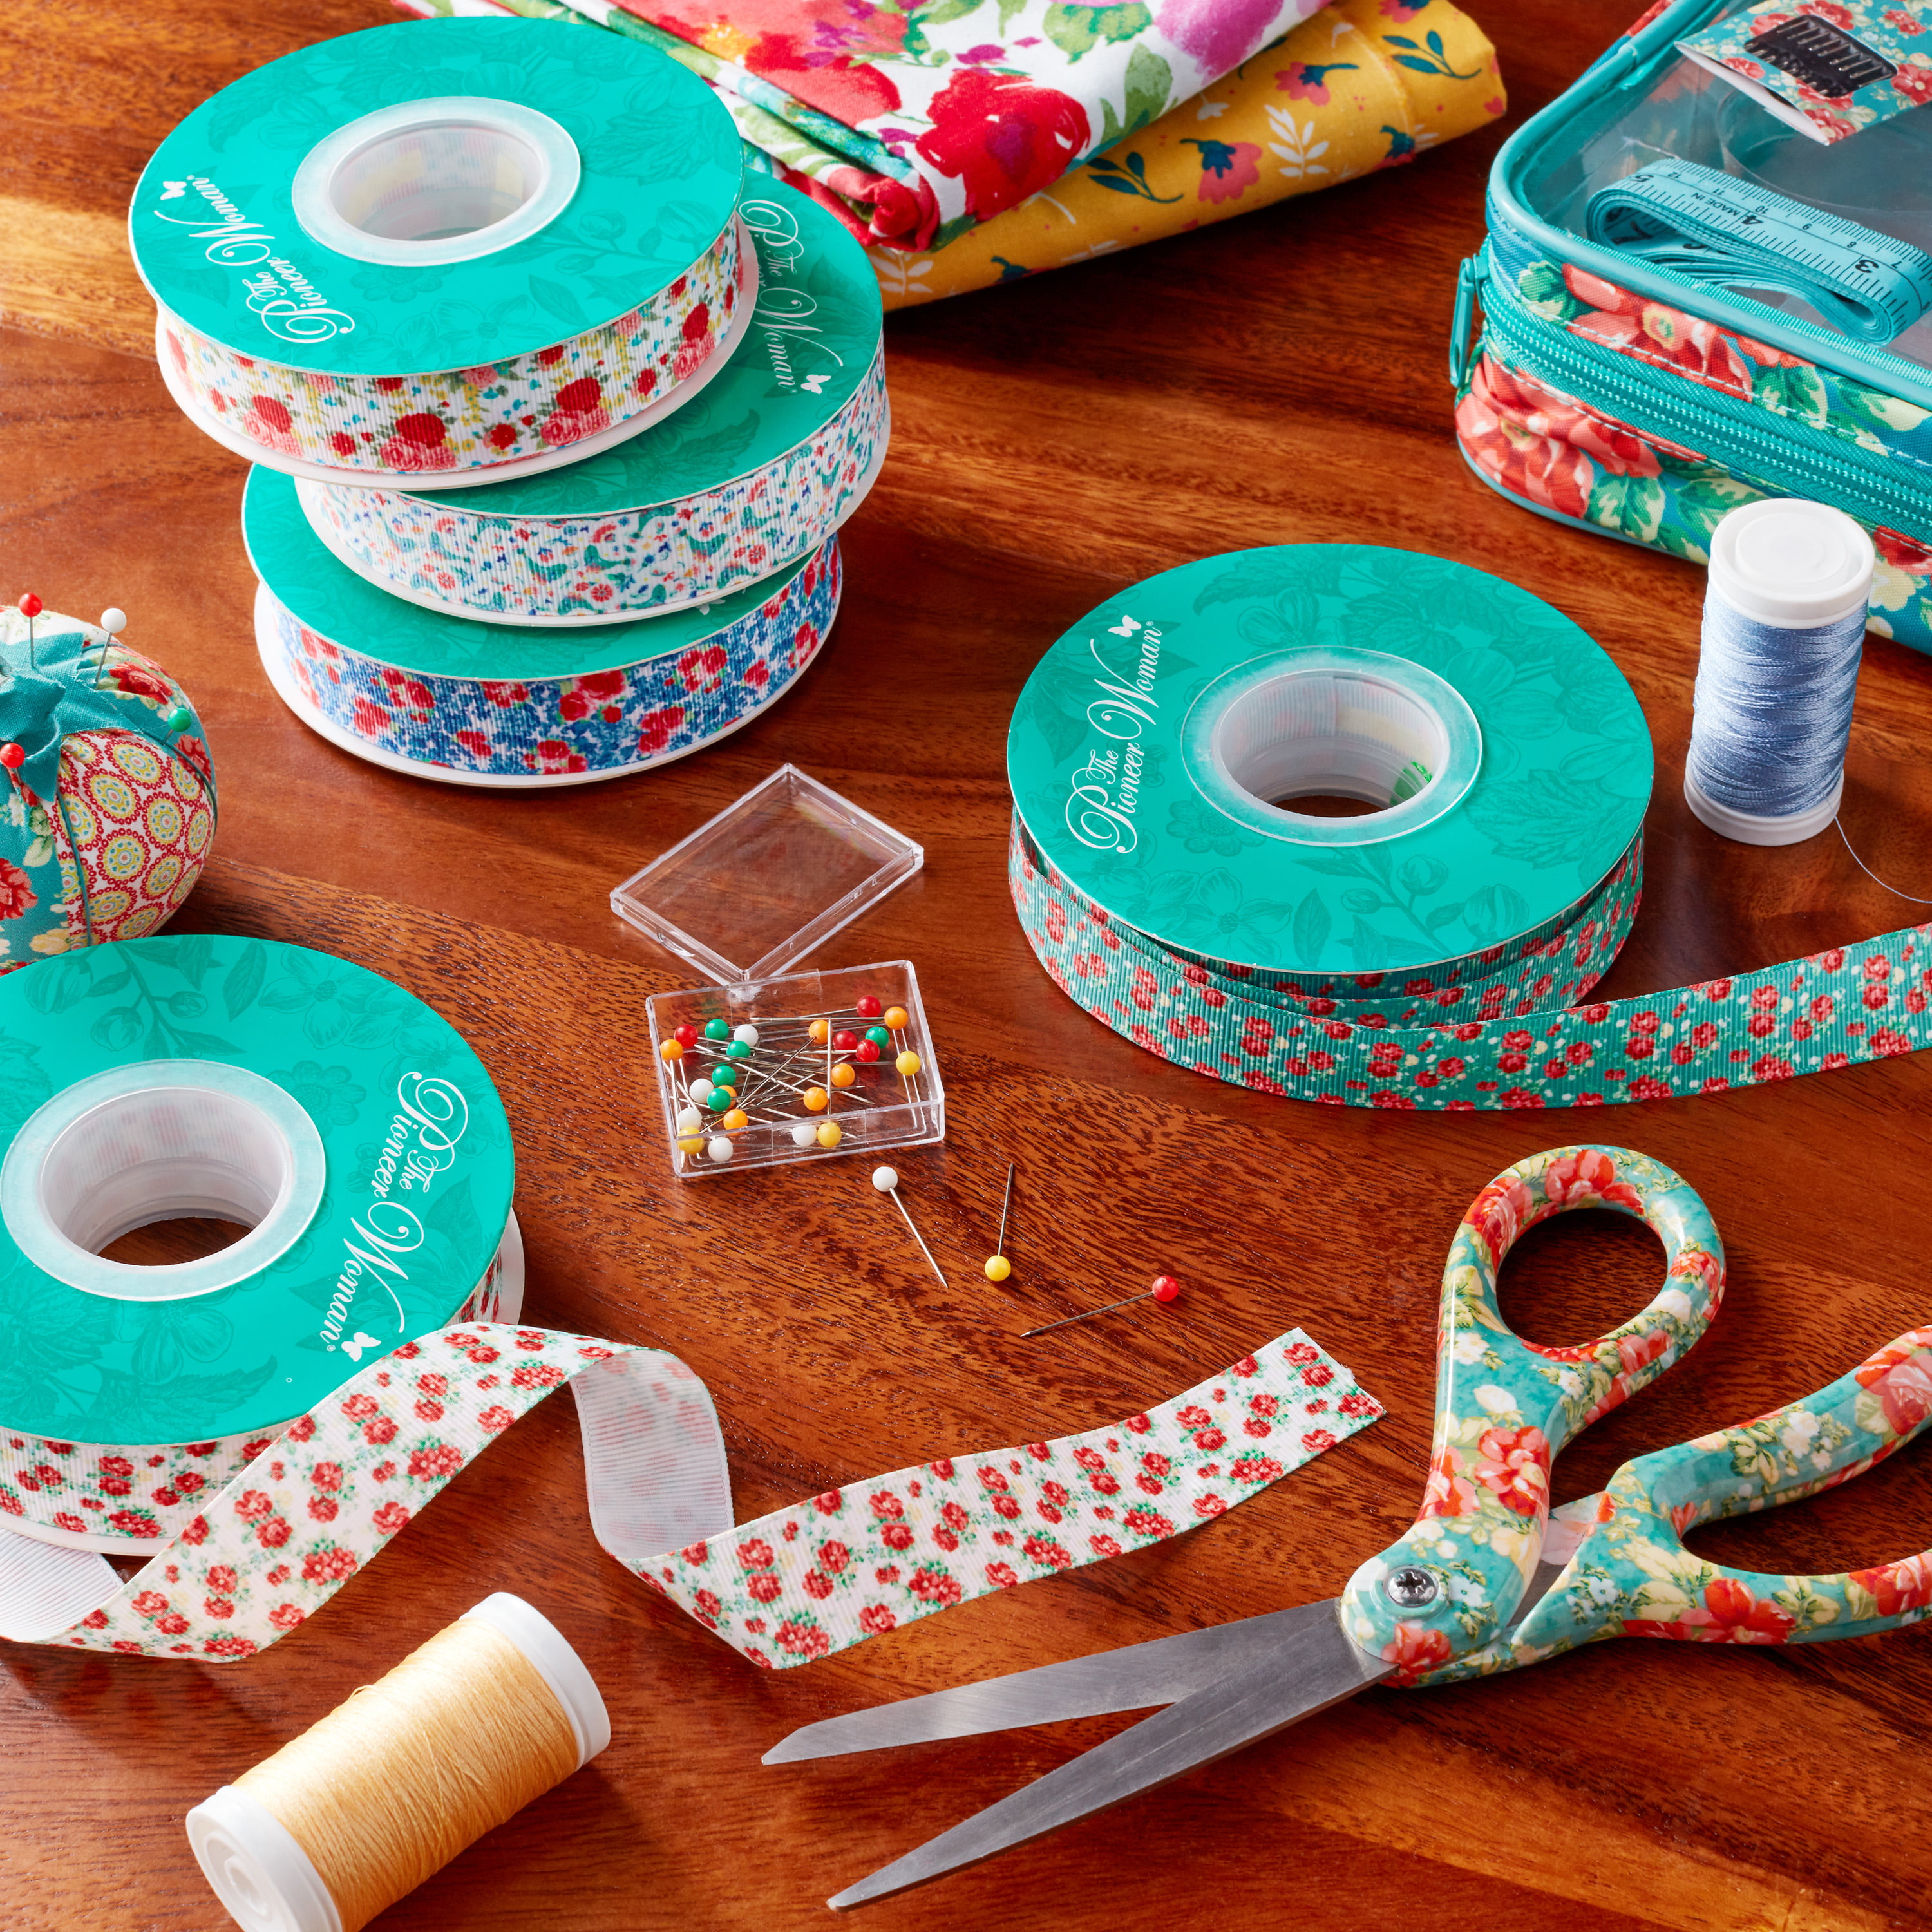 The Pioneer Woman Sewing Kits﻿ - Where to Buy Ree Drummond's